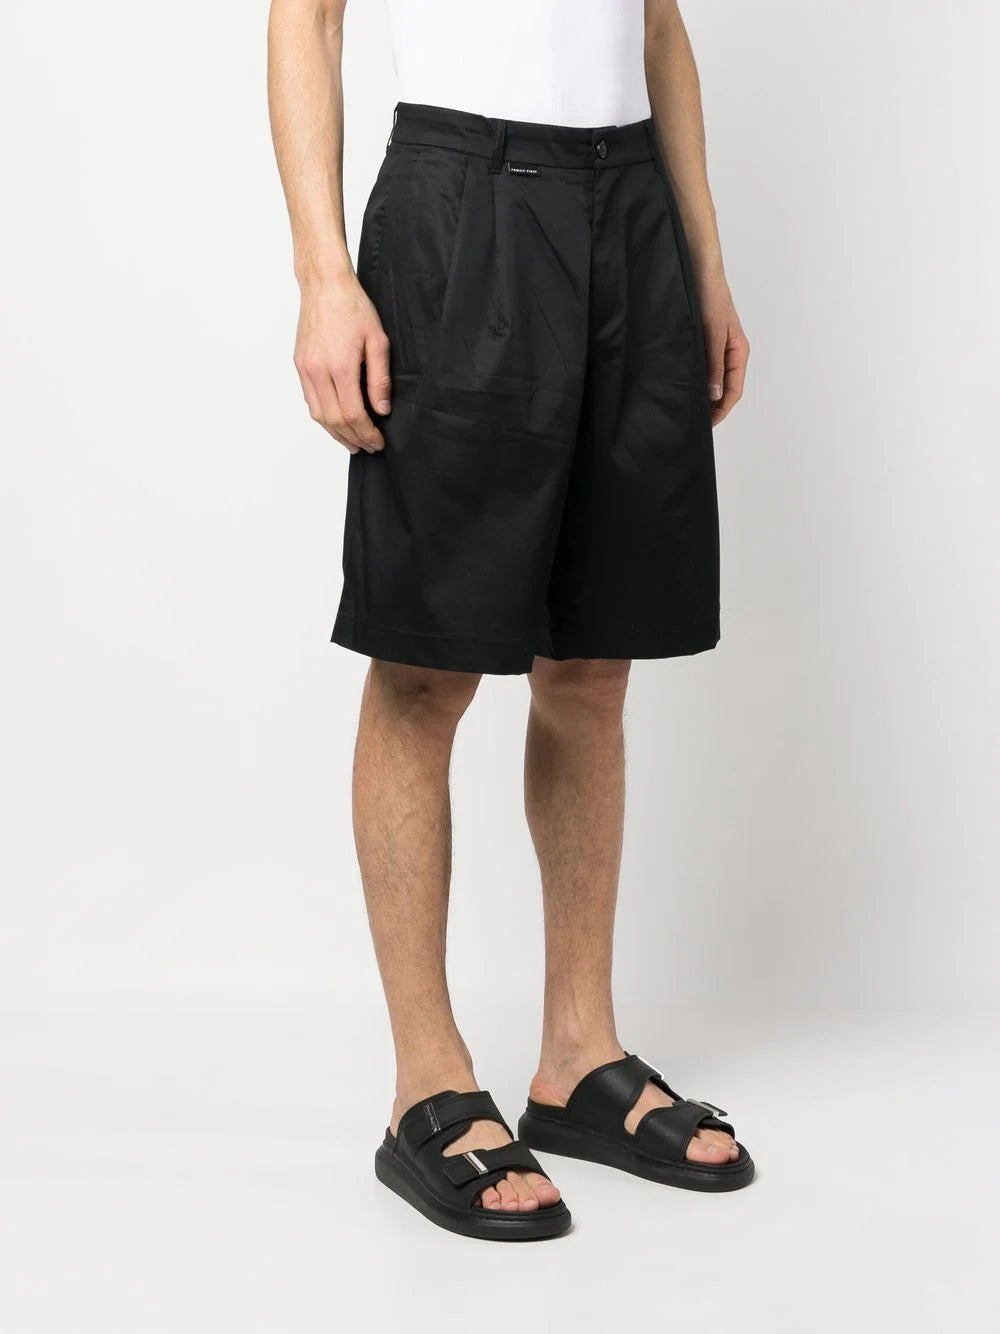 Family First Cotton Short Pant Black